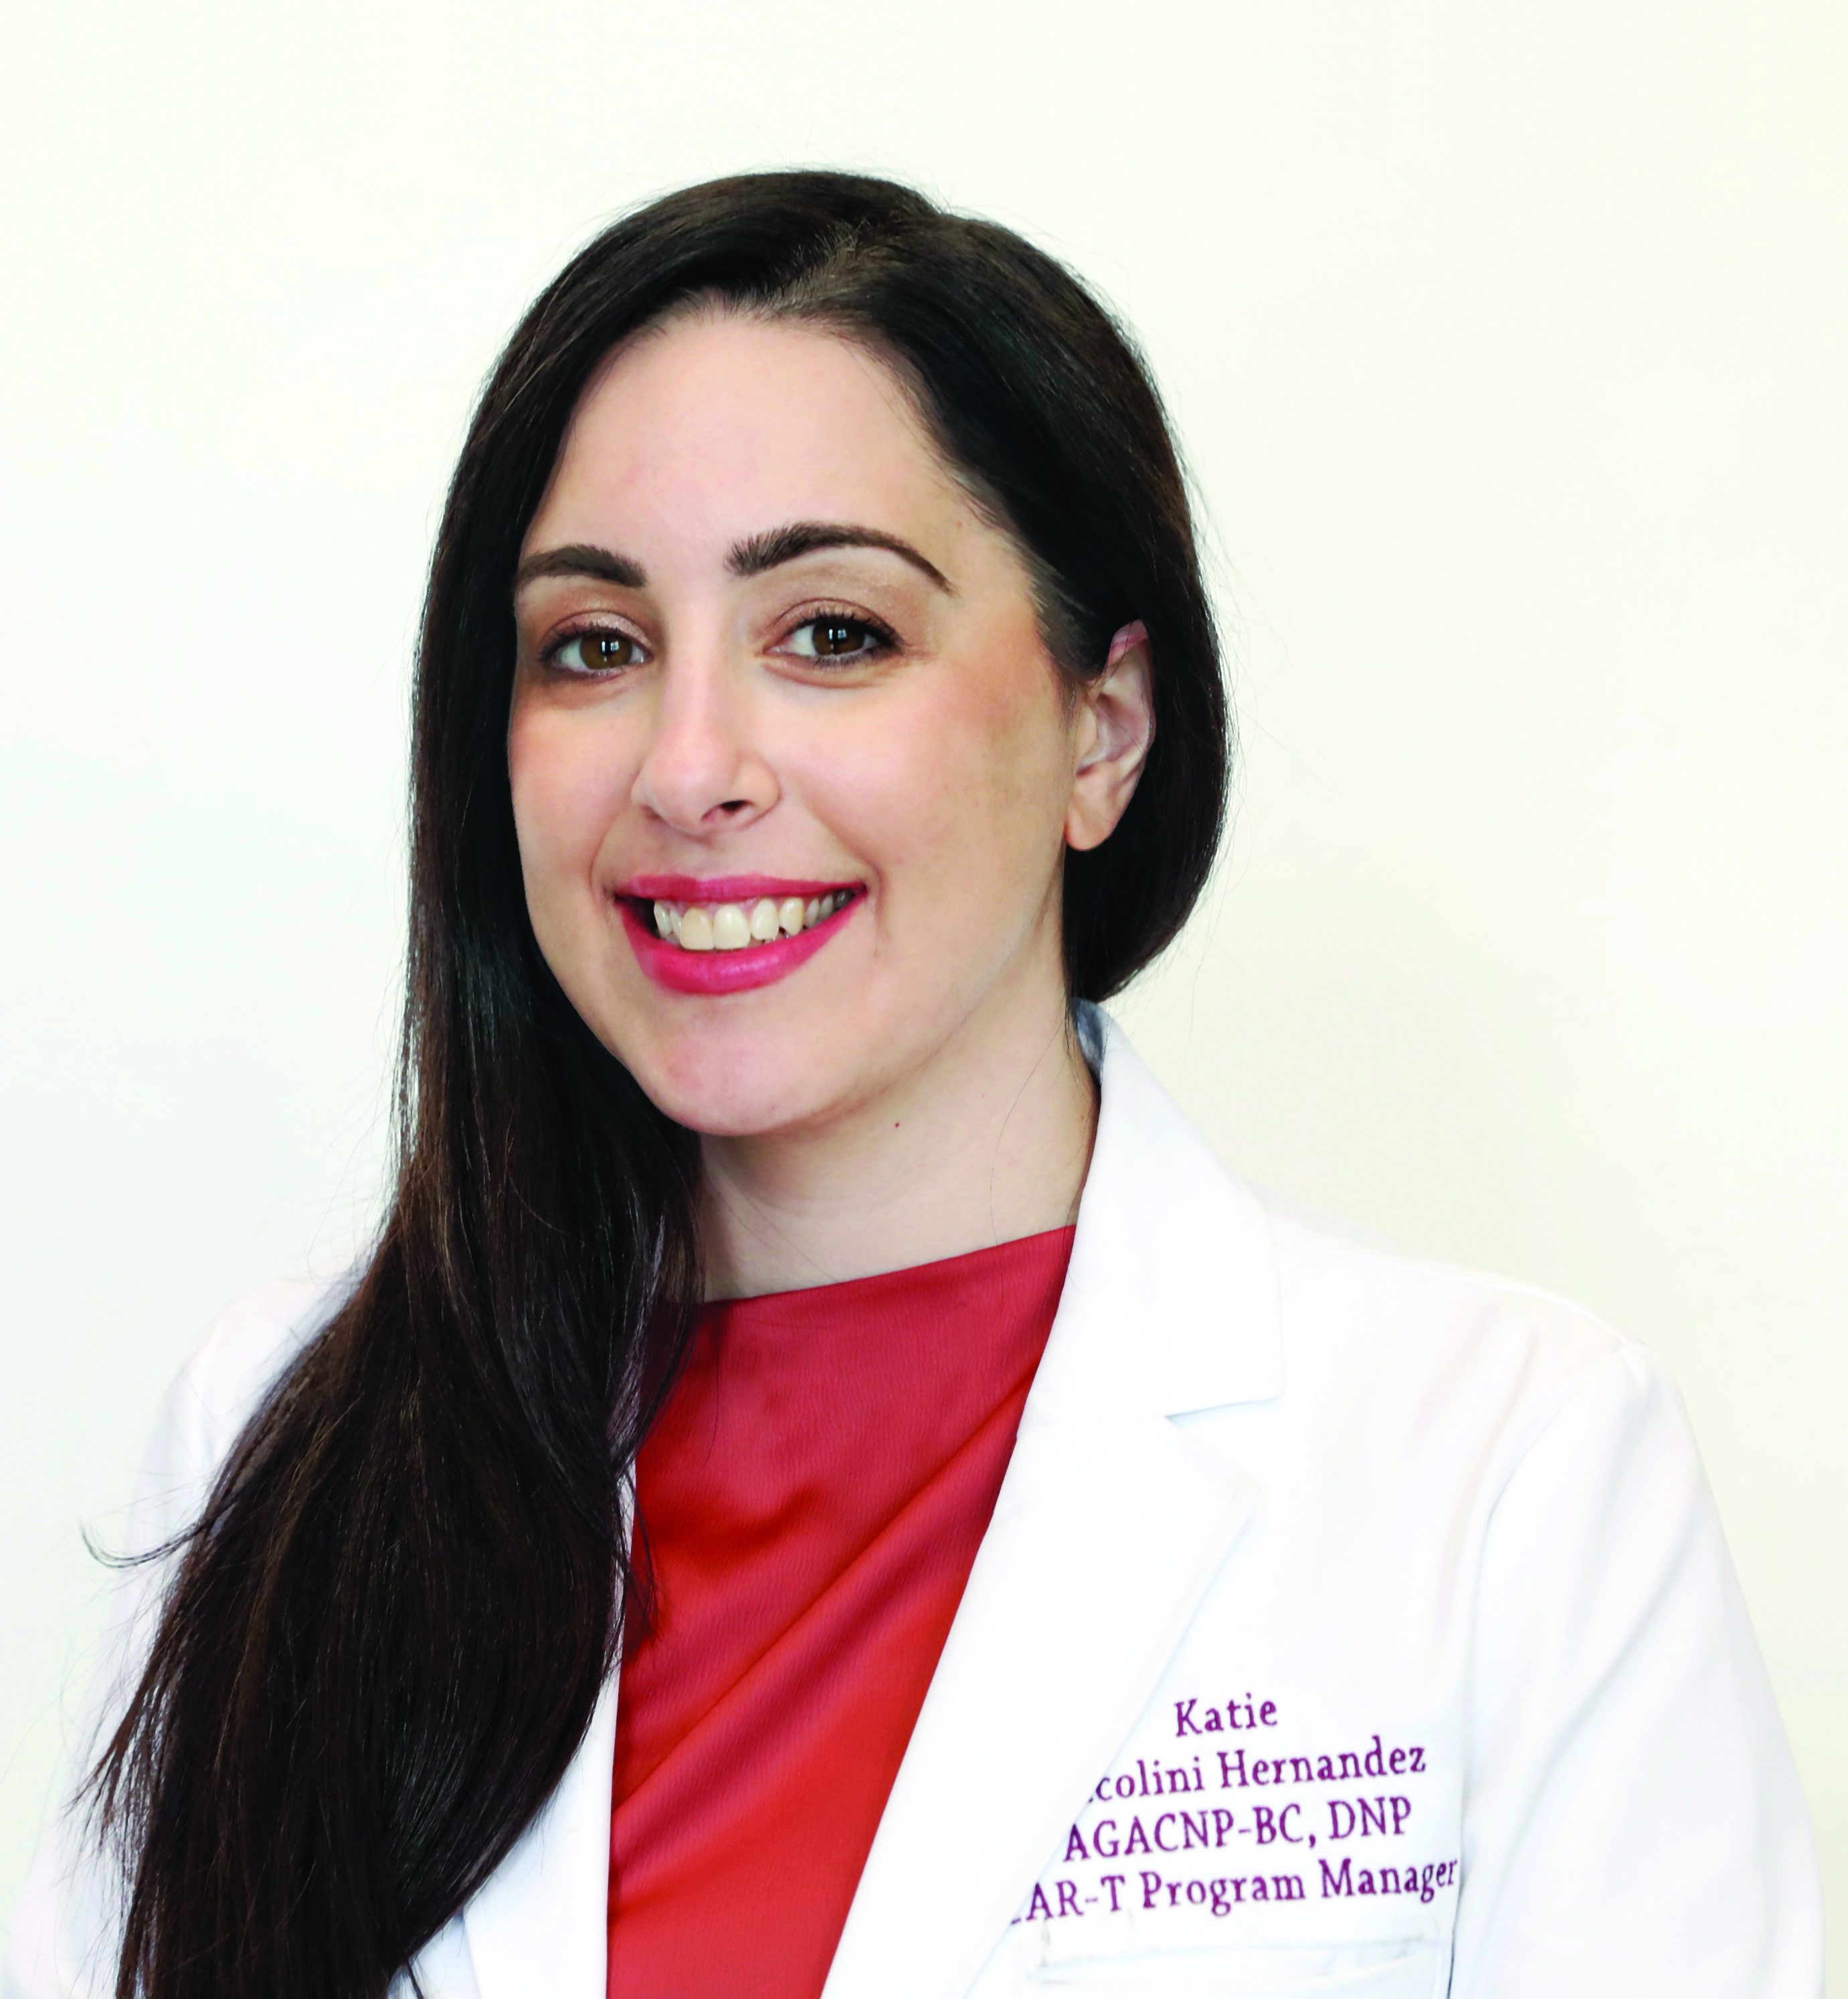 ONS member Kathryn Ciccolini, AGACNP-BC, DNP, MSN, OCN®, clinical program manager of cellular therapy at Mount Sinai Health System in New York, NY, and member of the New York City ONS Chapter